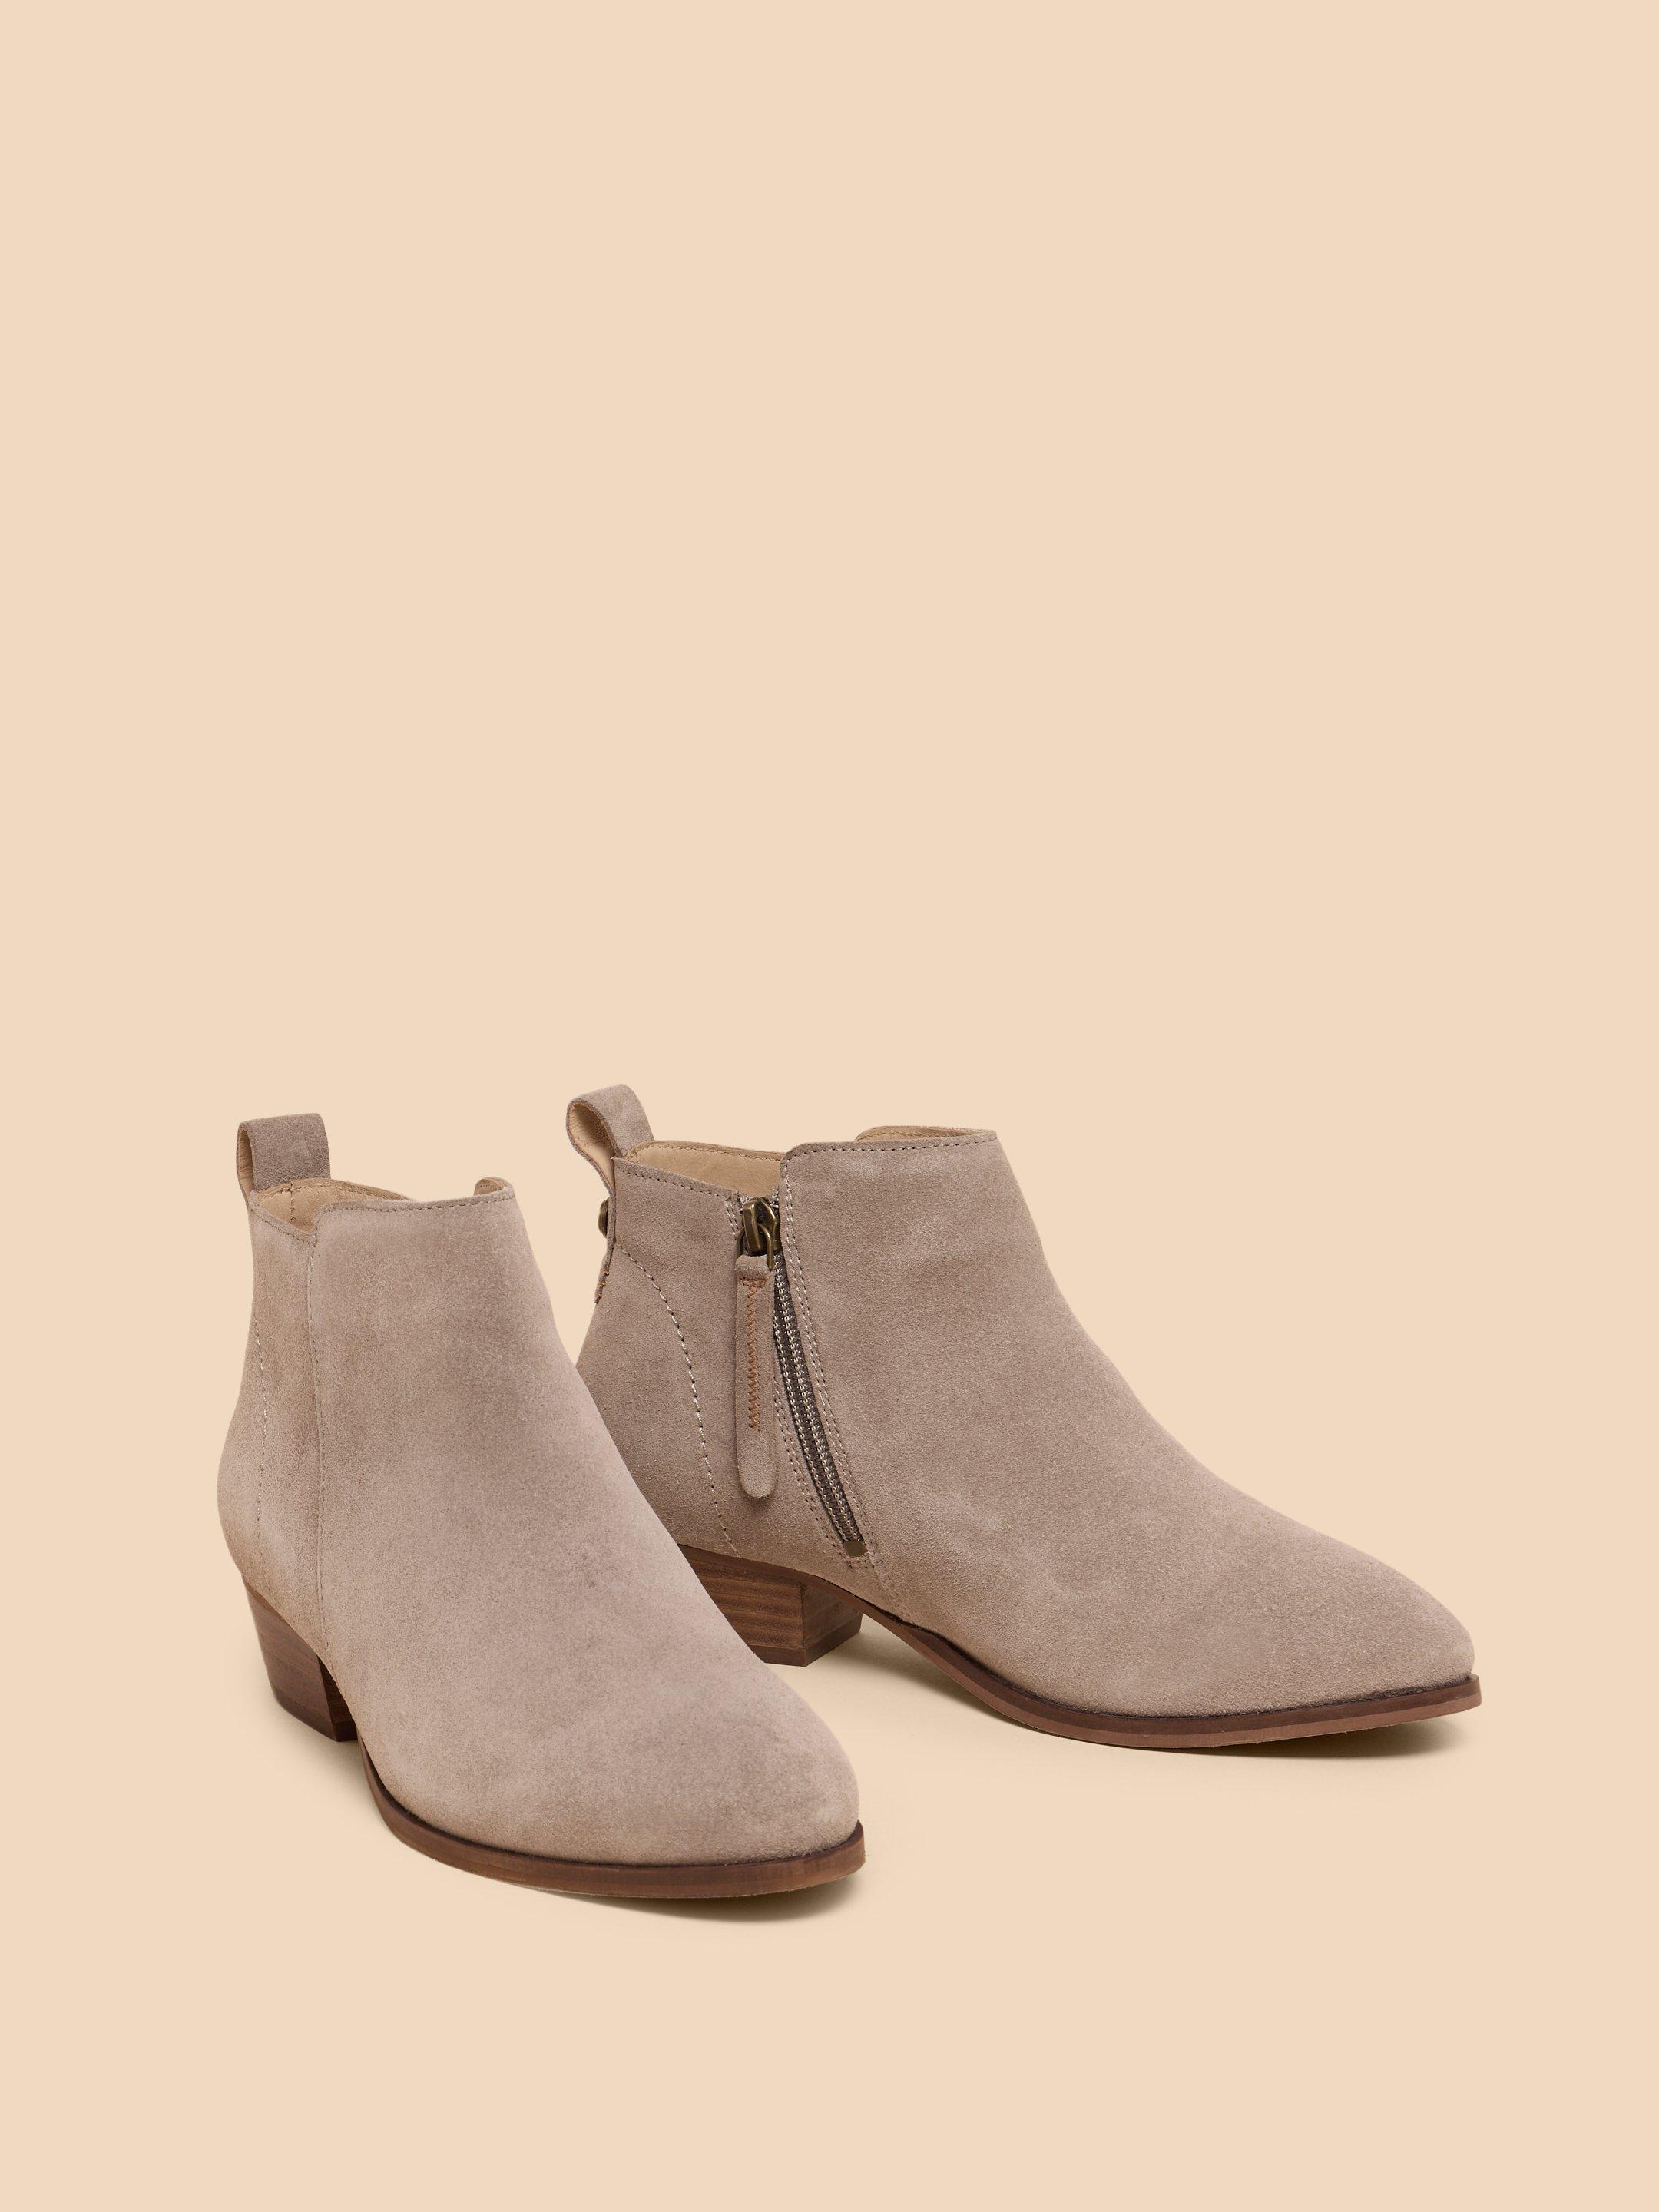 Willow Suede Ankle Boot in LGT GREY - FLAT FRONT